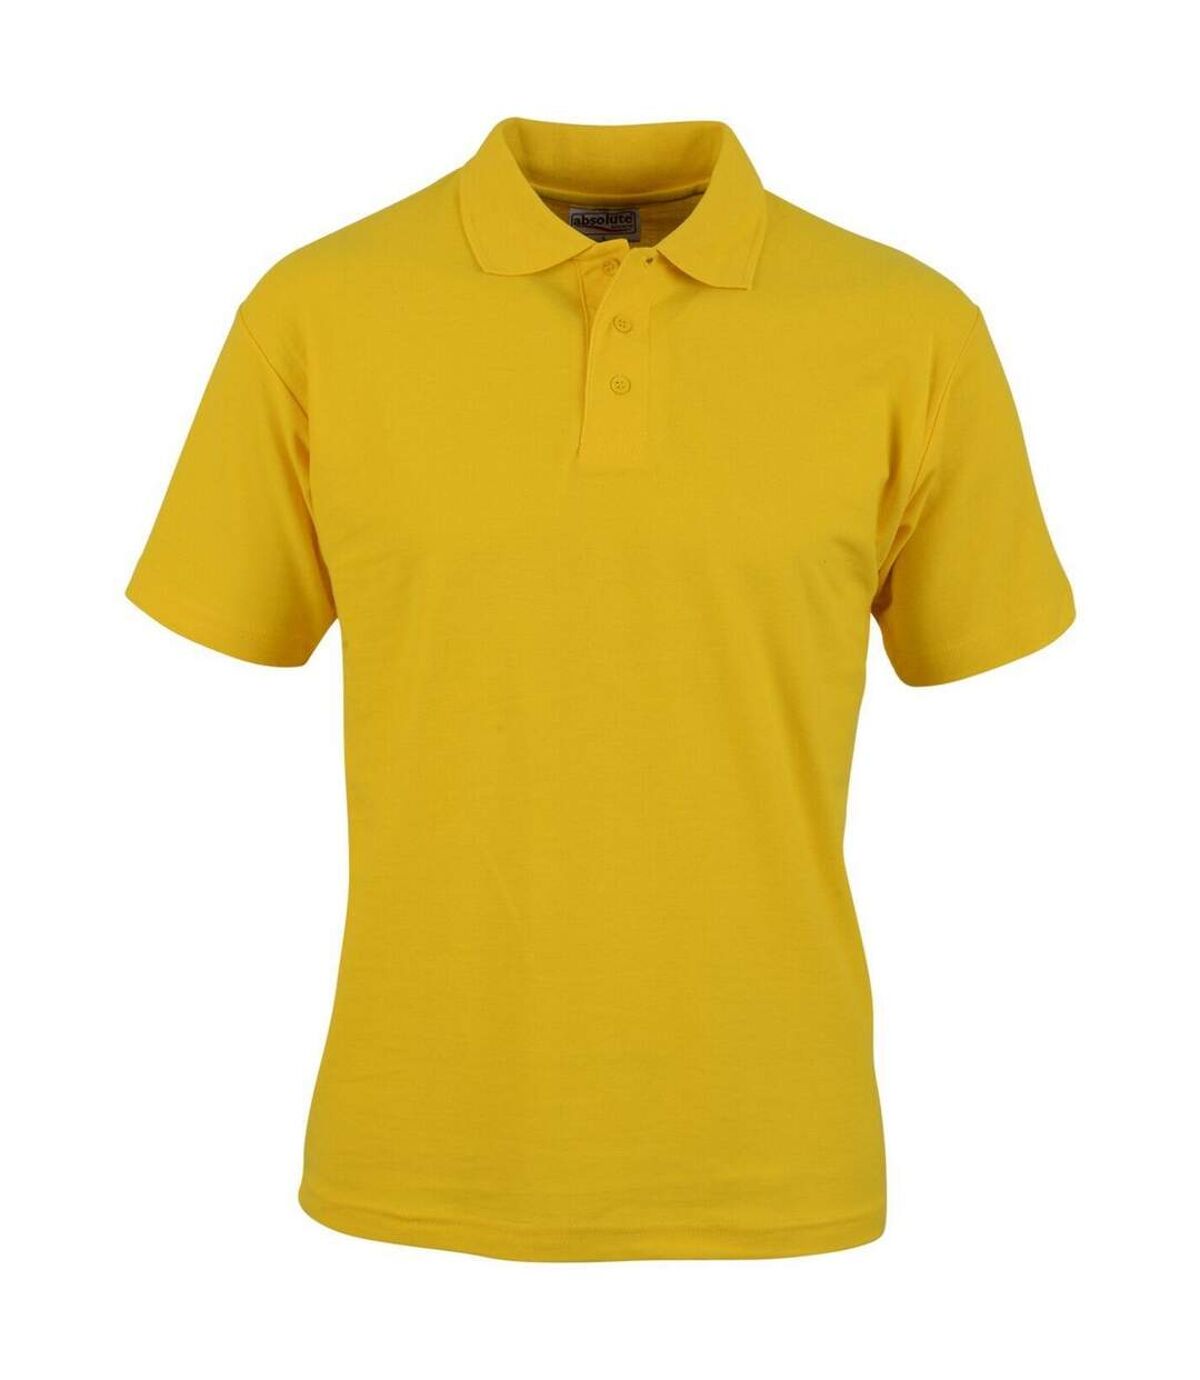 Absolute Apparel Mens Pioneer Polo (Sunflower)